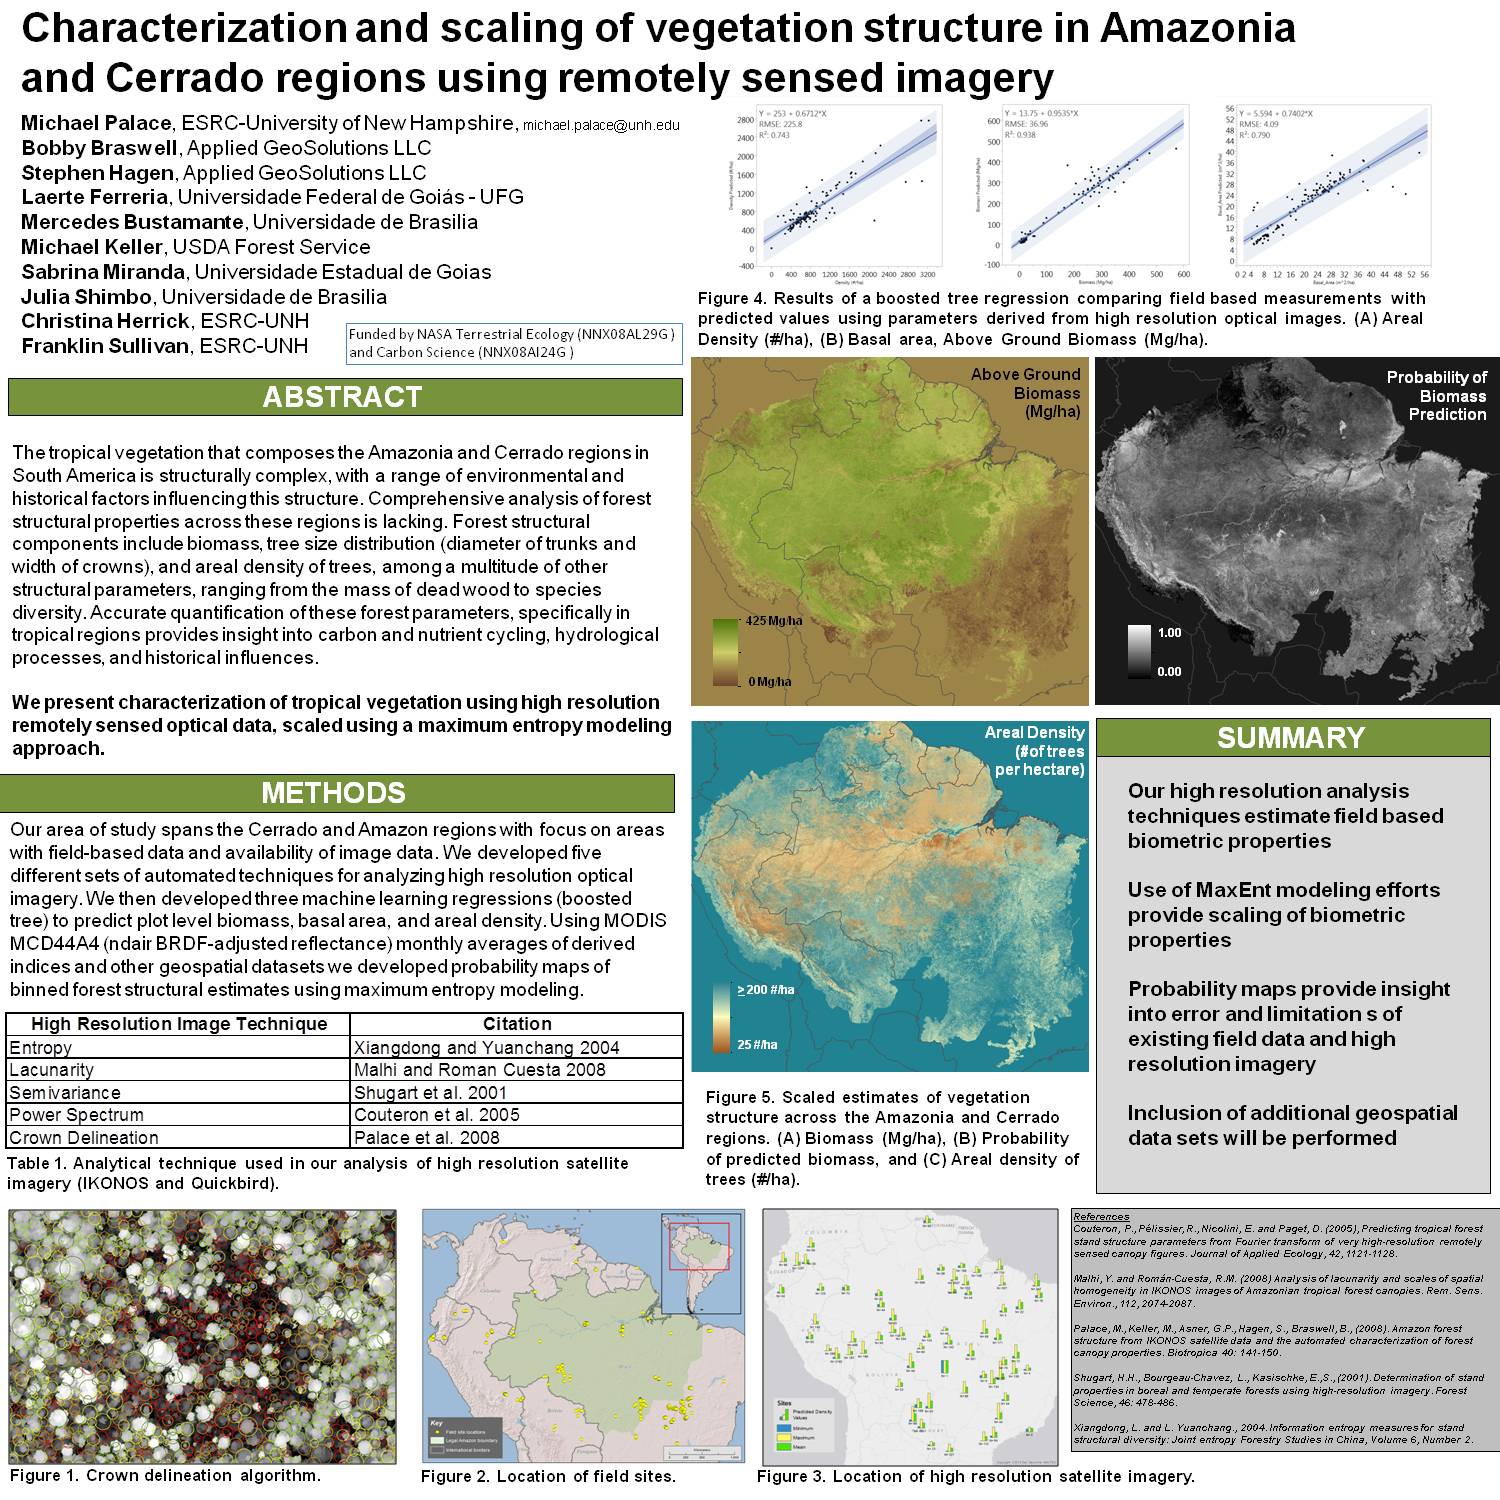 Characterization And Scaling Of Vegetation Structure In Amazonia  And Cerrado Regions Using Remotely Sensed Imagery by palace